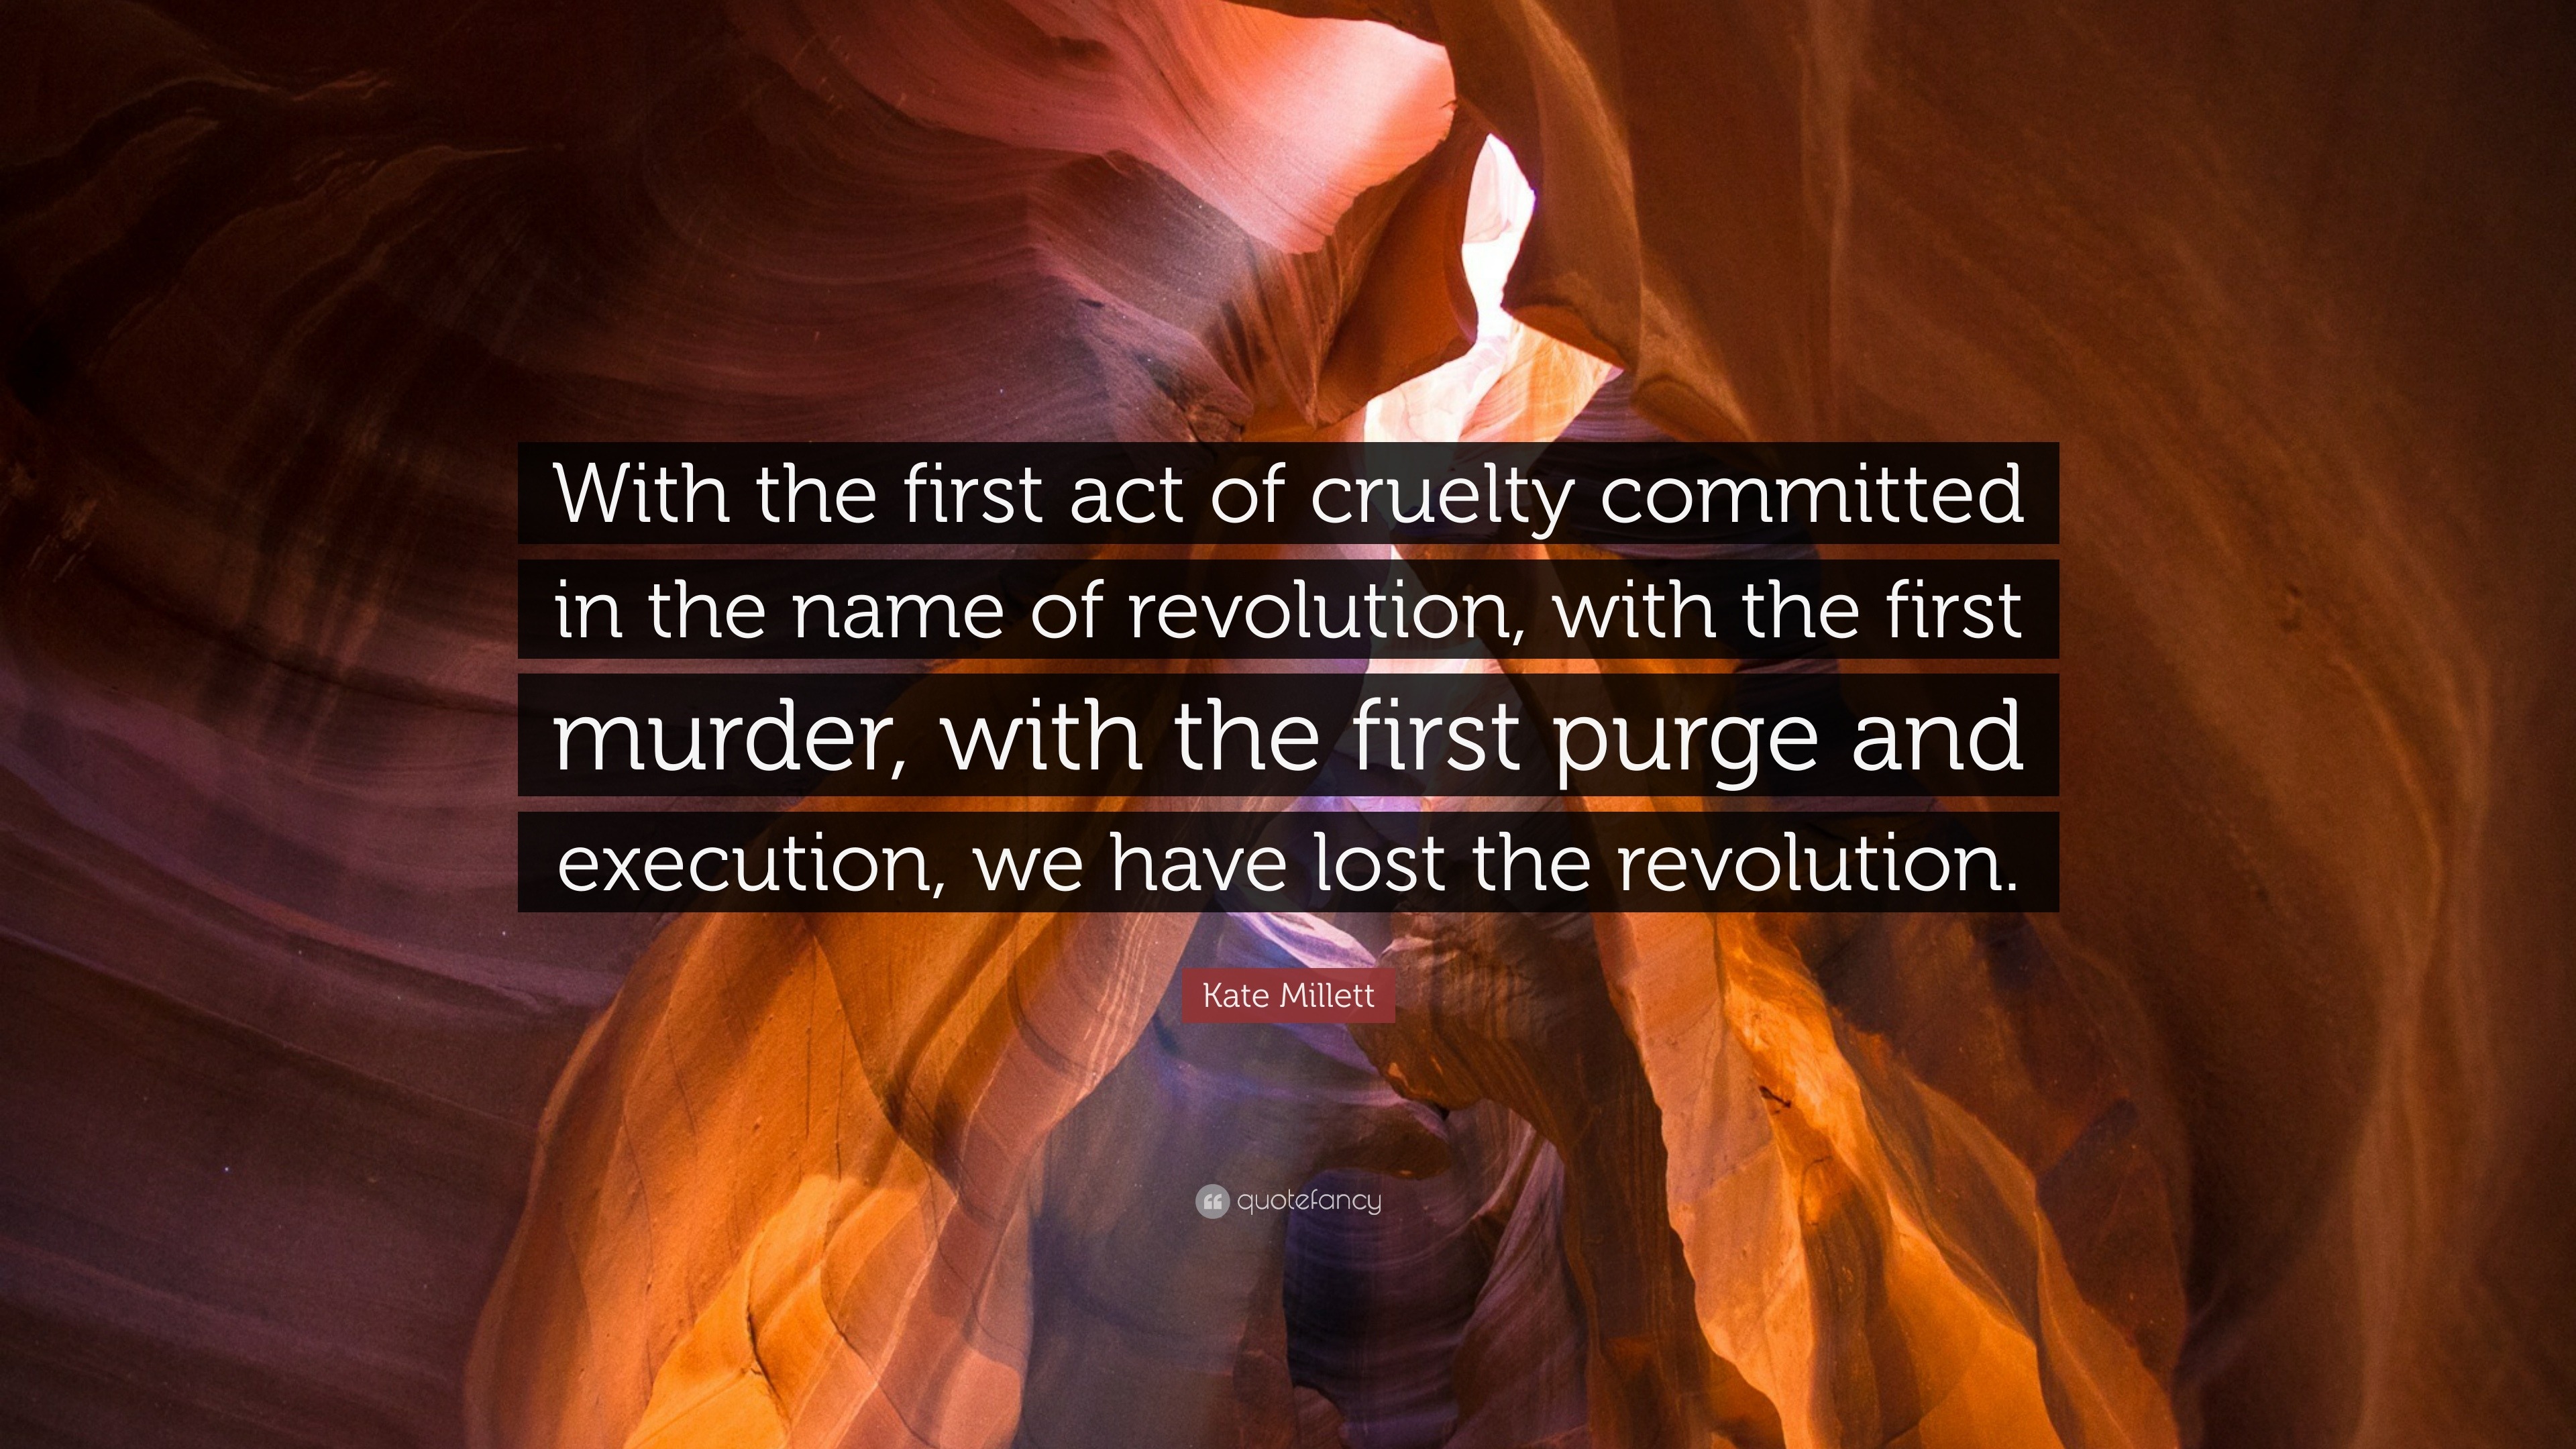 Kate Millett Quote With The First Act Of Cruelty Committed In The Name Of Revolution With The First Murder With The First Purge And Execu 7 Wallpapers Quotefancy Tons of awesome the first purge wallpapers to download for free. kate millett quote with the first act